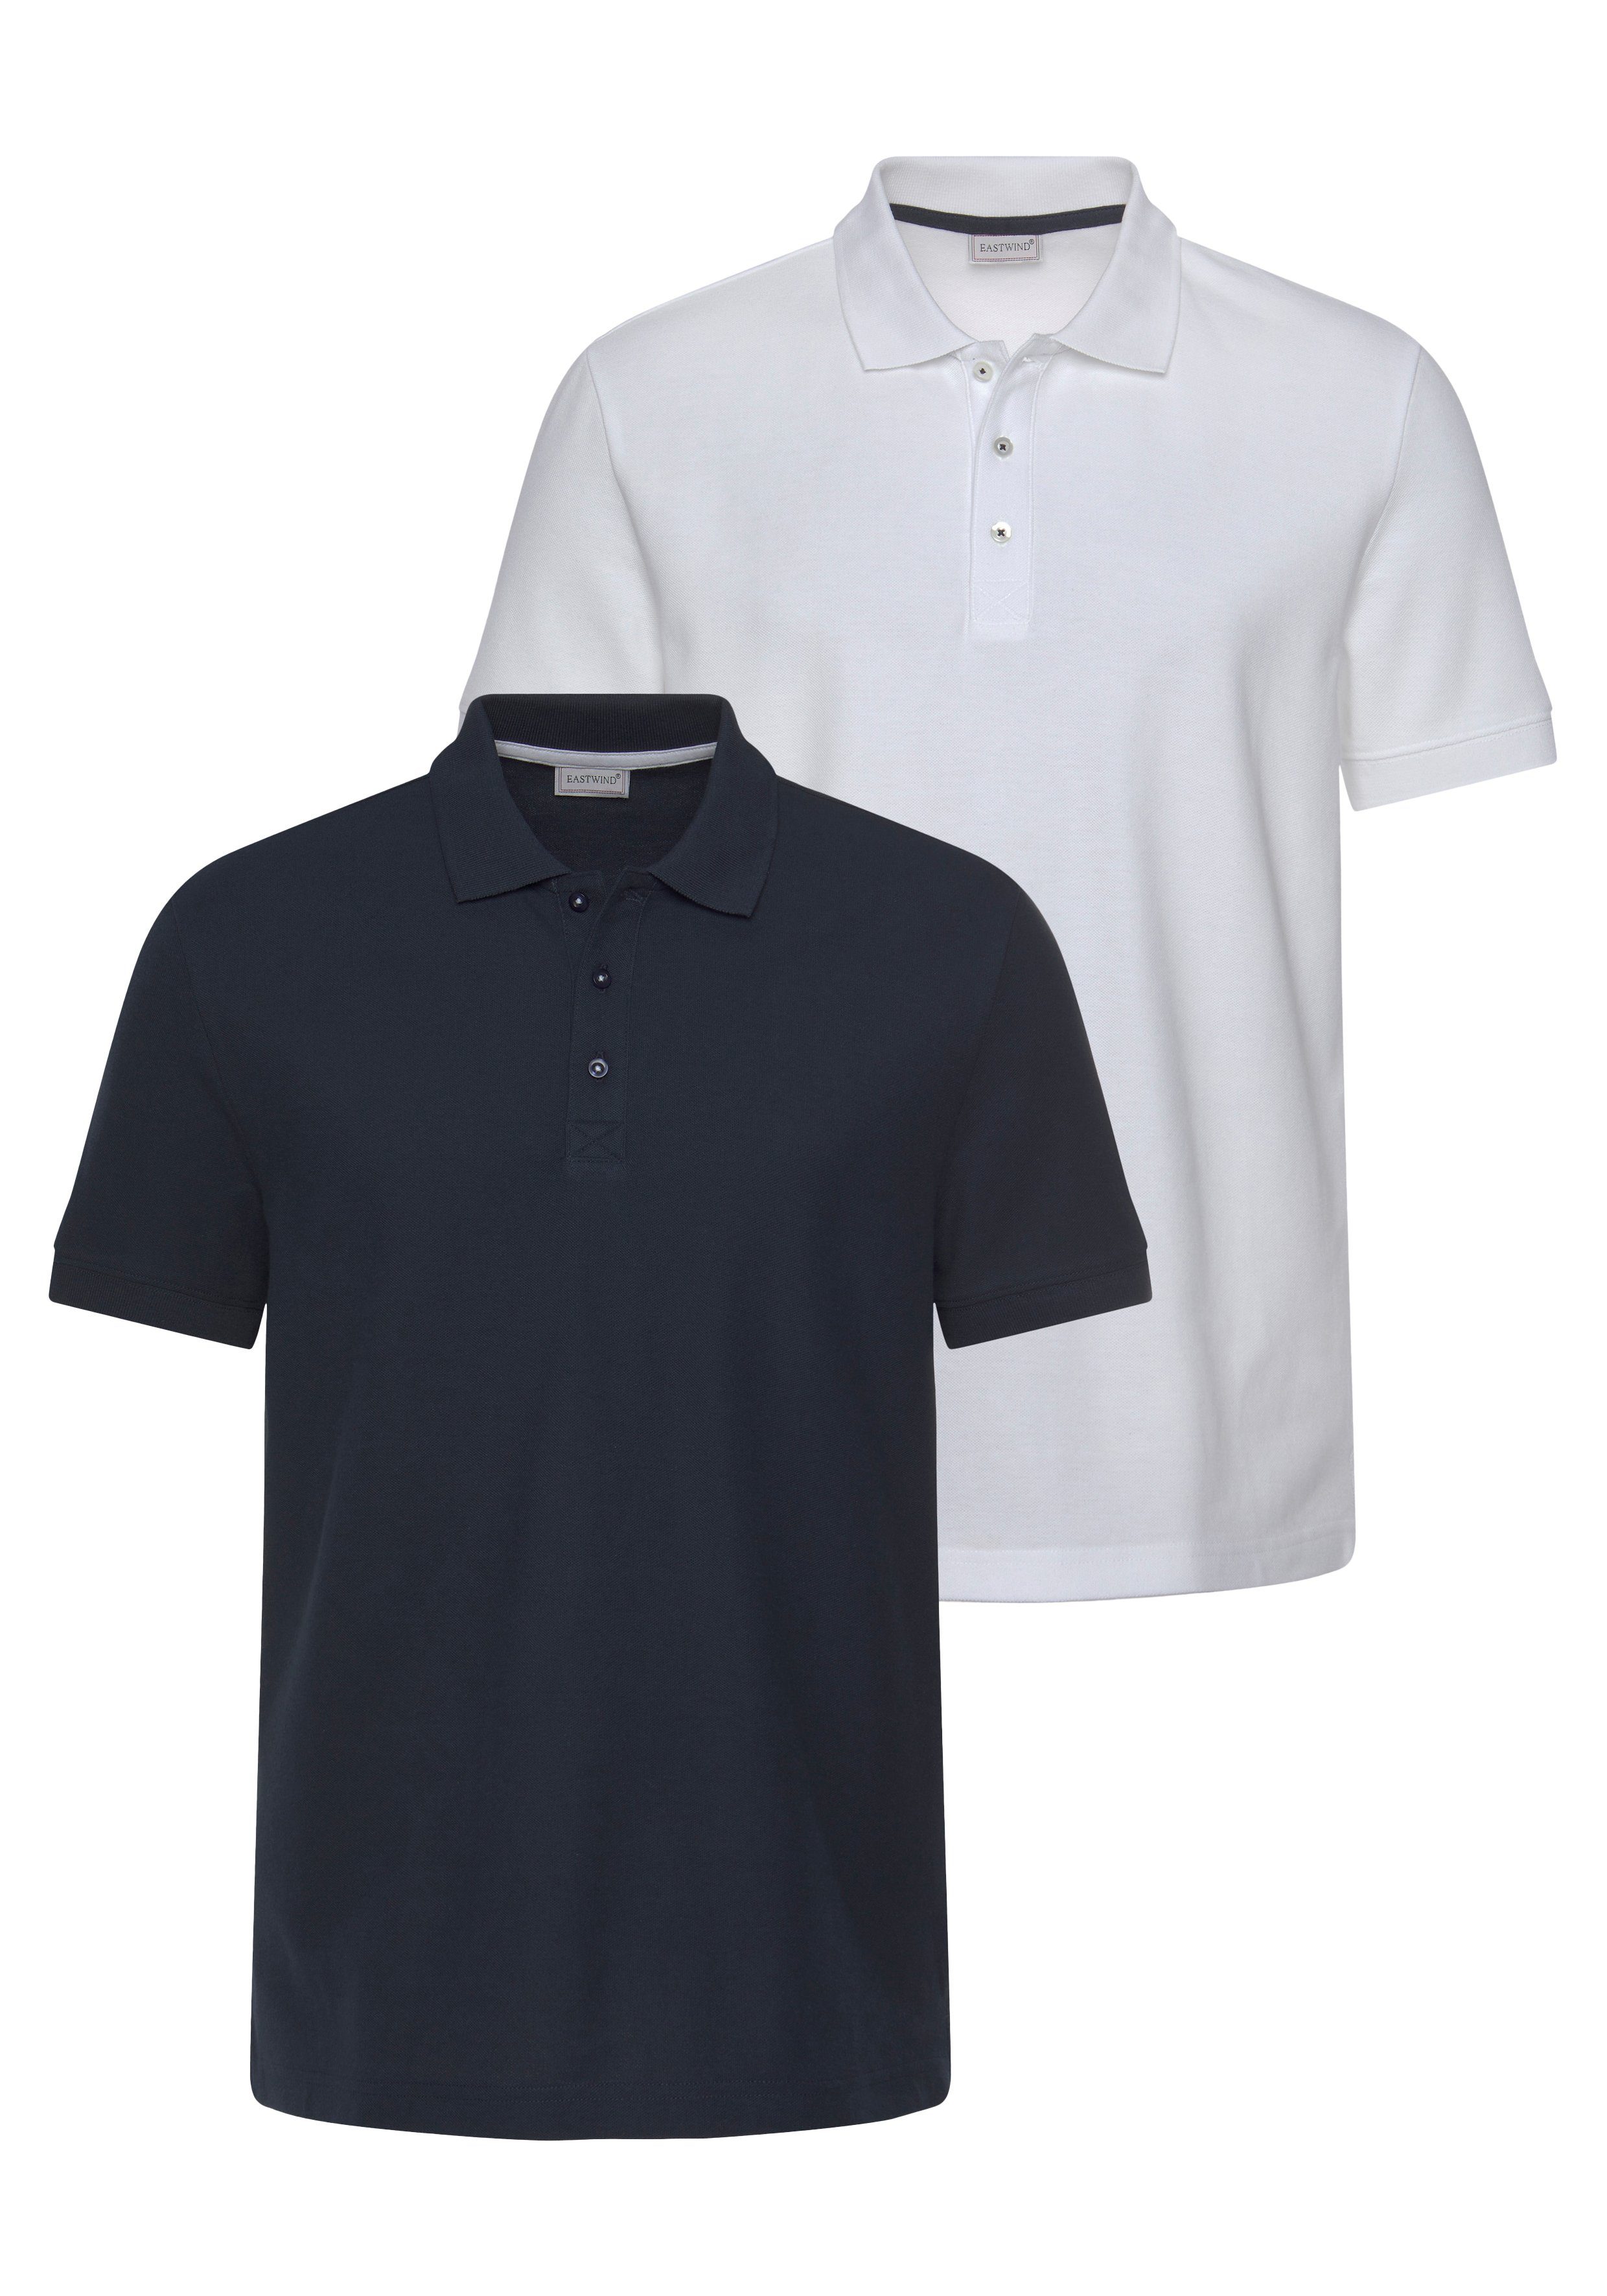 Eastwind Poloshirt Double Pack Polo, (2er-Pack) marine-weiß navy+white